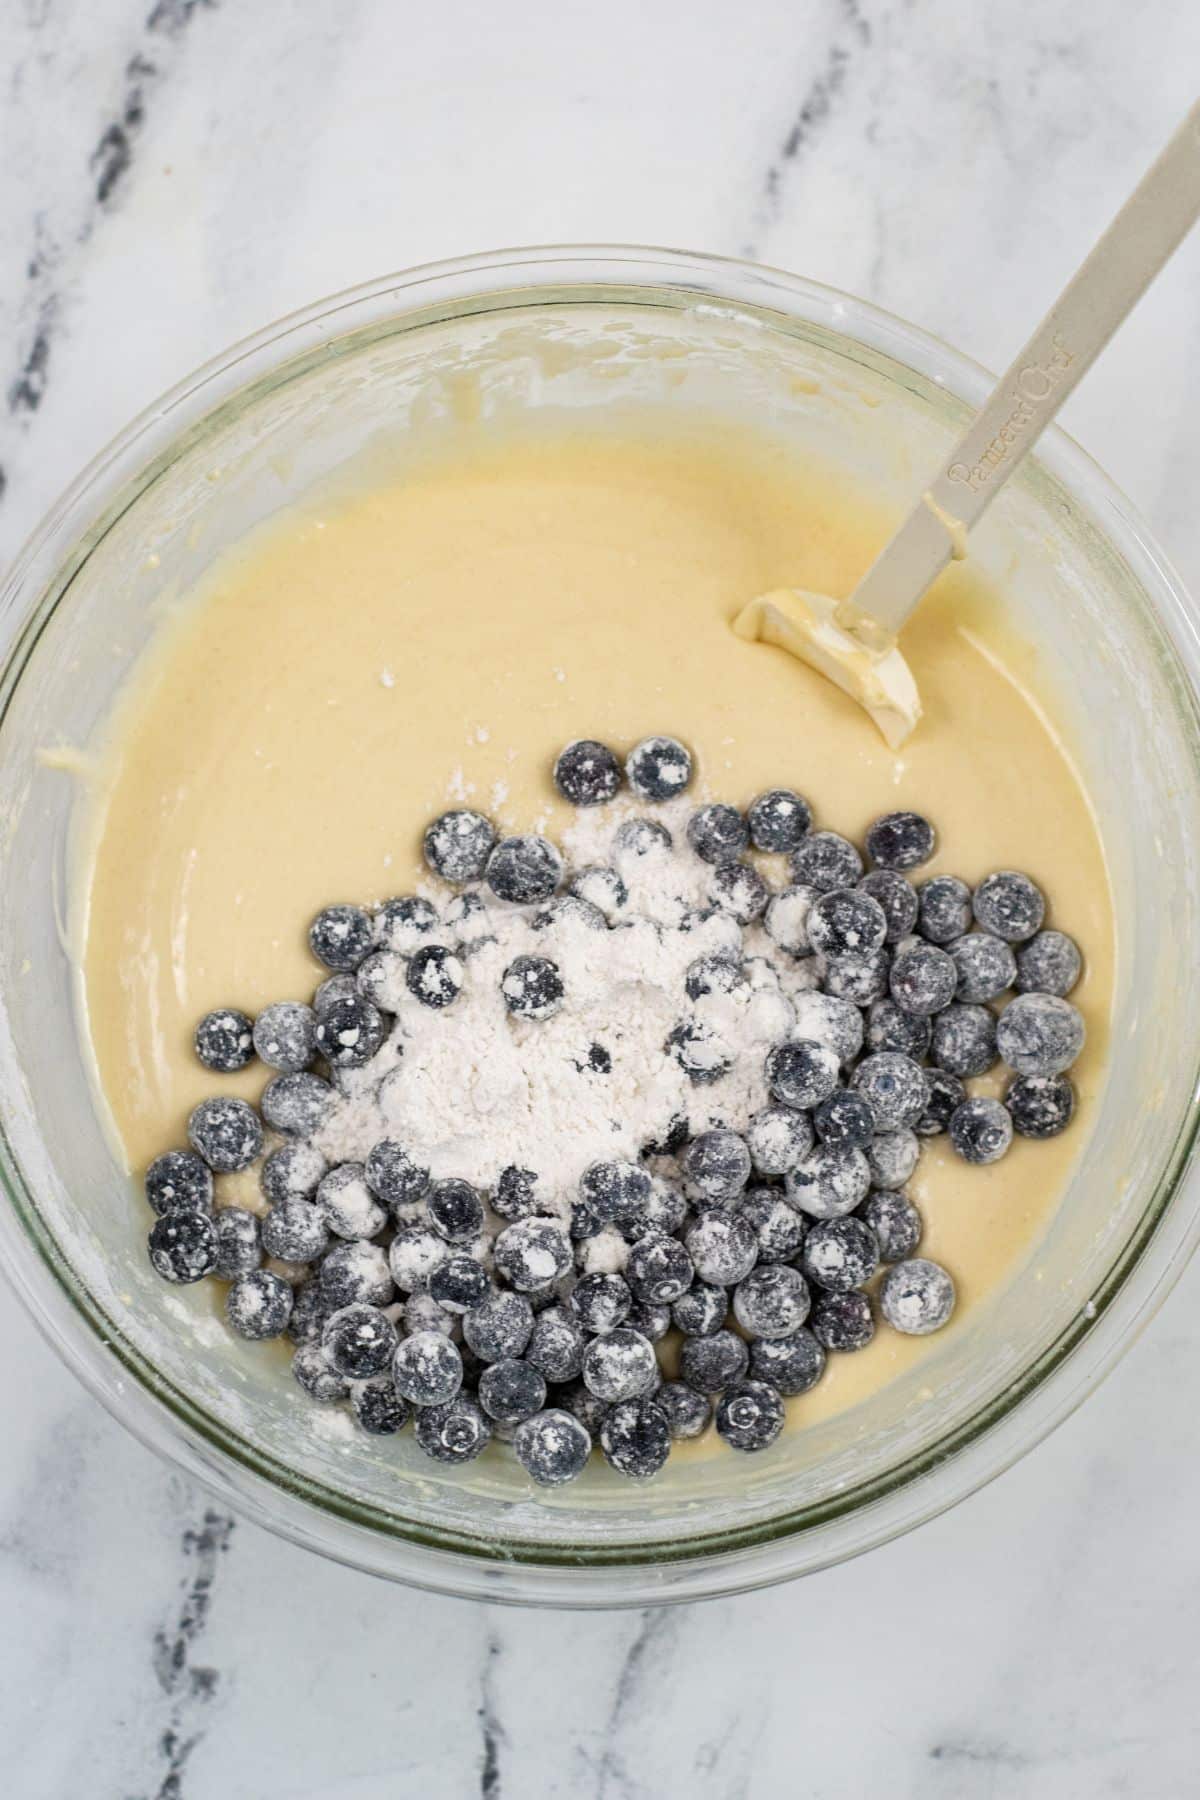 Batter and blueberries coated with flour in a bowl with a spatula in it